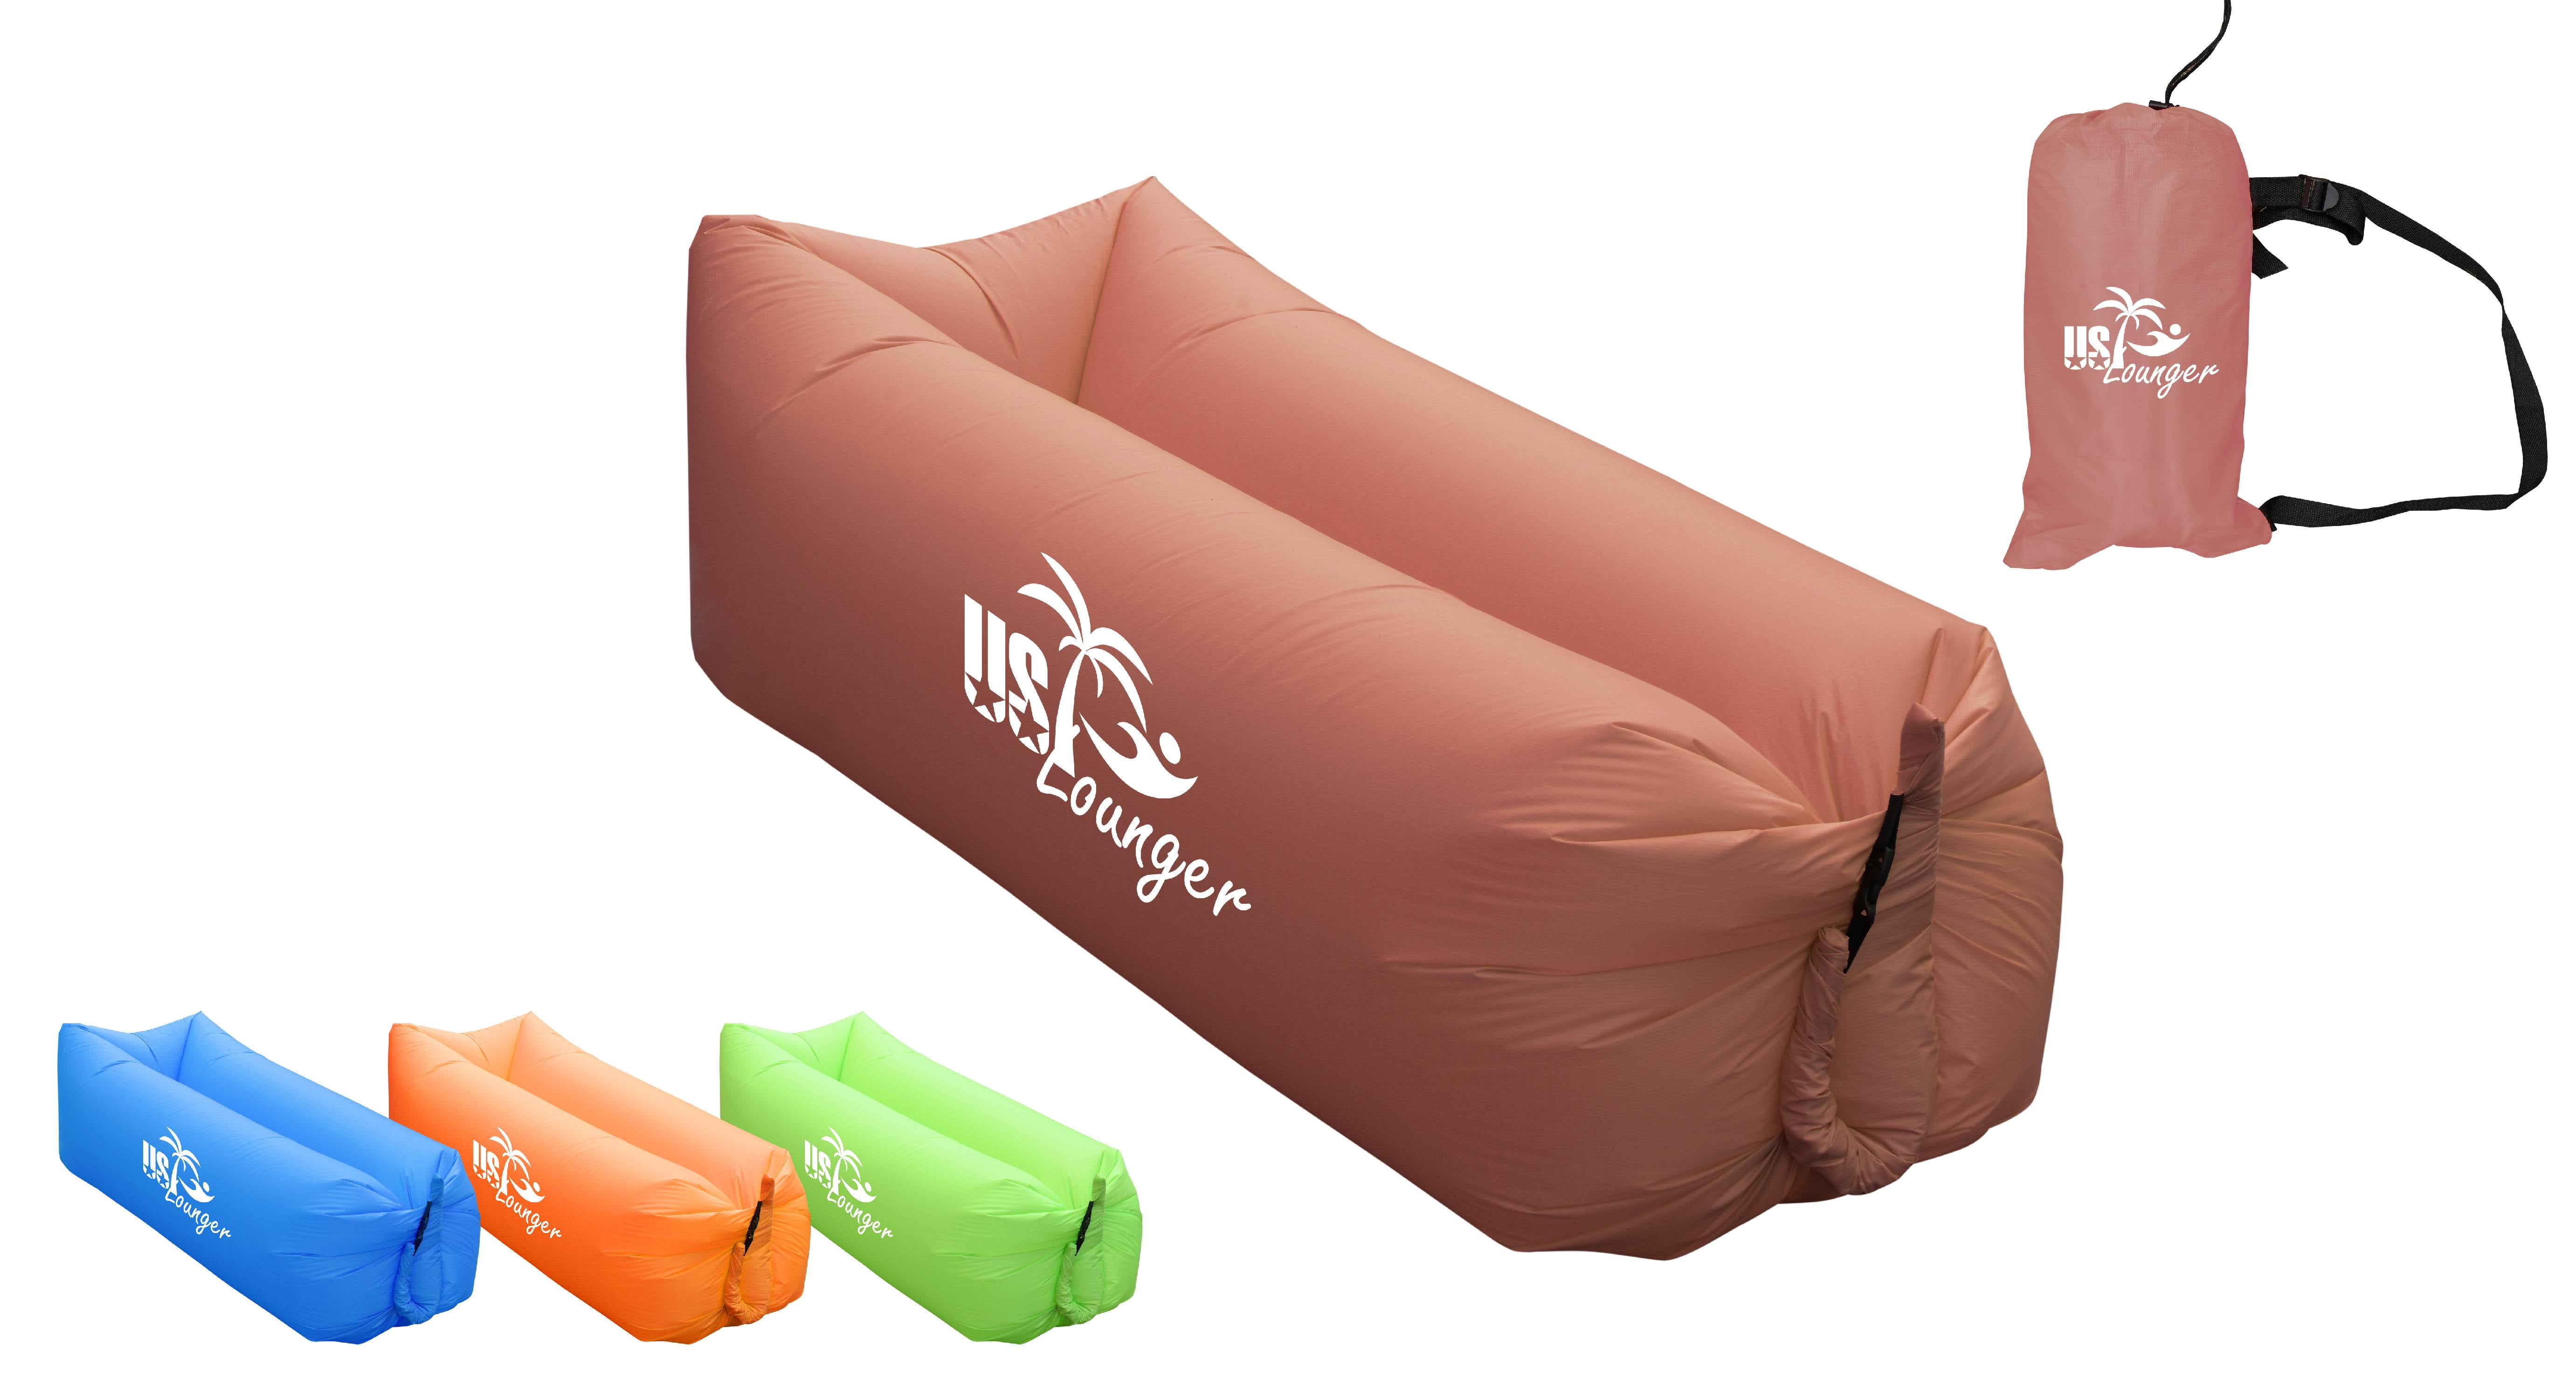 wind inflatable bed